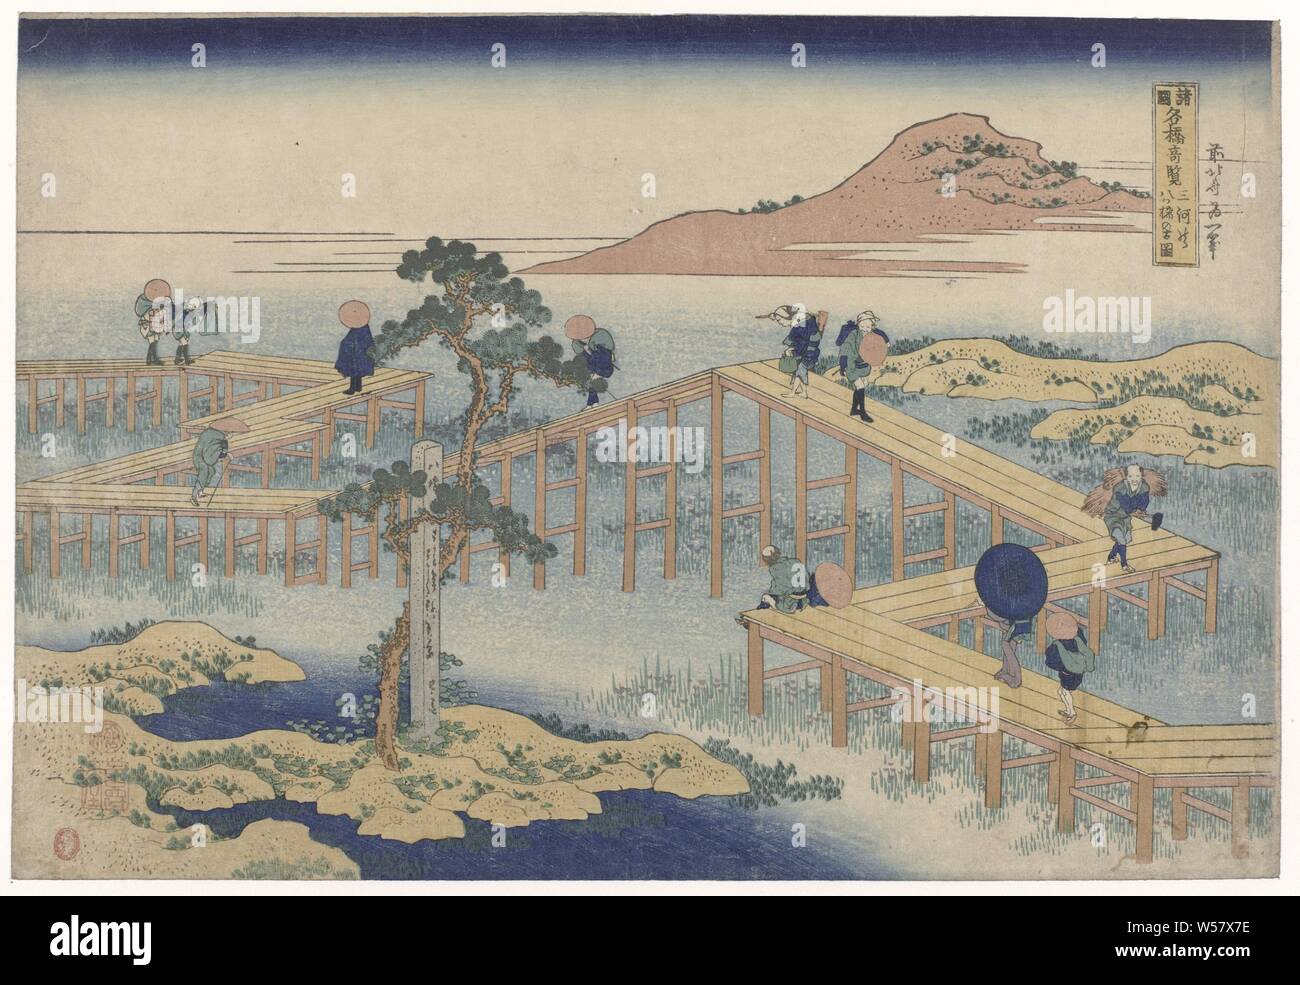 The zigzag bridge in the province of Mikawa Mikawa no yatsuhashi no kozu (title on object) Views of famous bridges in the provinces (series title) Shokoku meikyo kiran (title on object), Travelers on the famous zigzagging bridge, looking at the flowering irises in the swamp. In the foreground a pine tree near a Buddhist monument, landscape with bridge, viaduct or aqueduct, Katsushika Hokusai (mentioned on object), 1830 - 1834, paper, colour woodcut, h 262 mm × w 384 mm Stock Photo